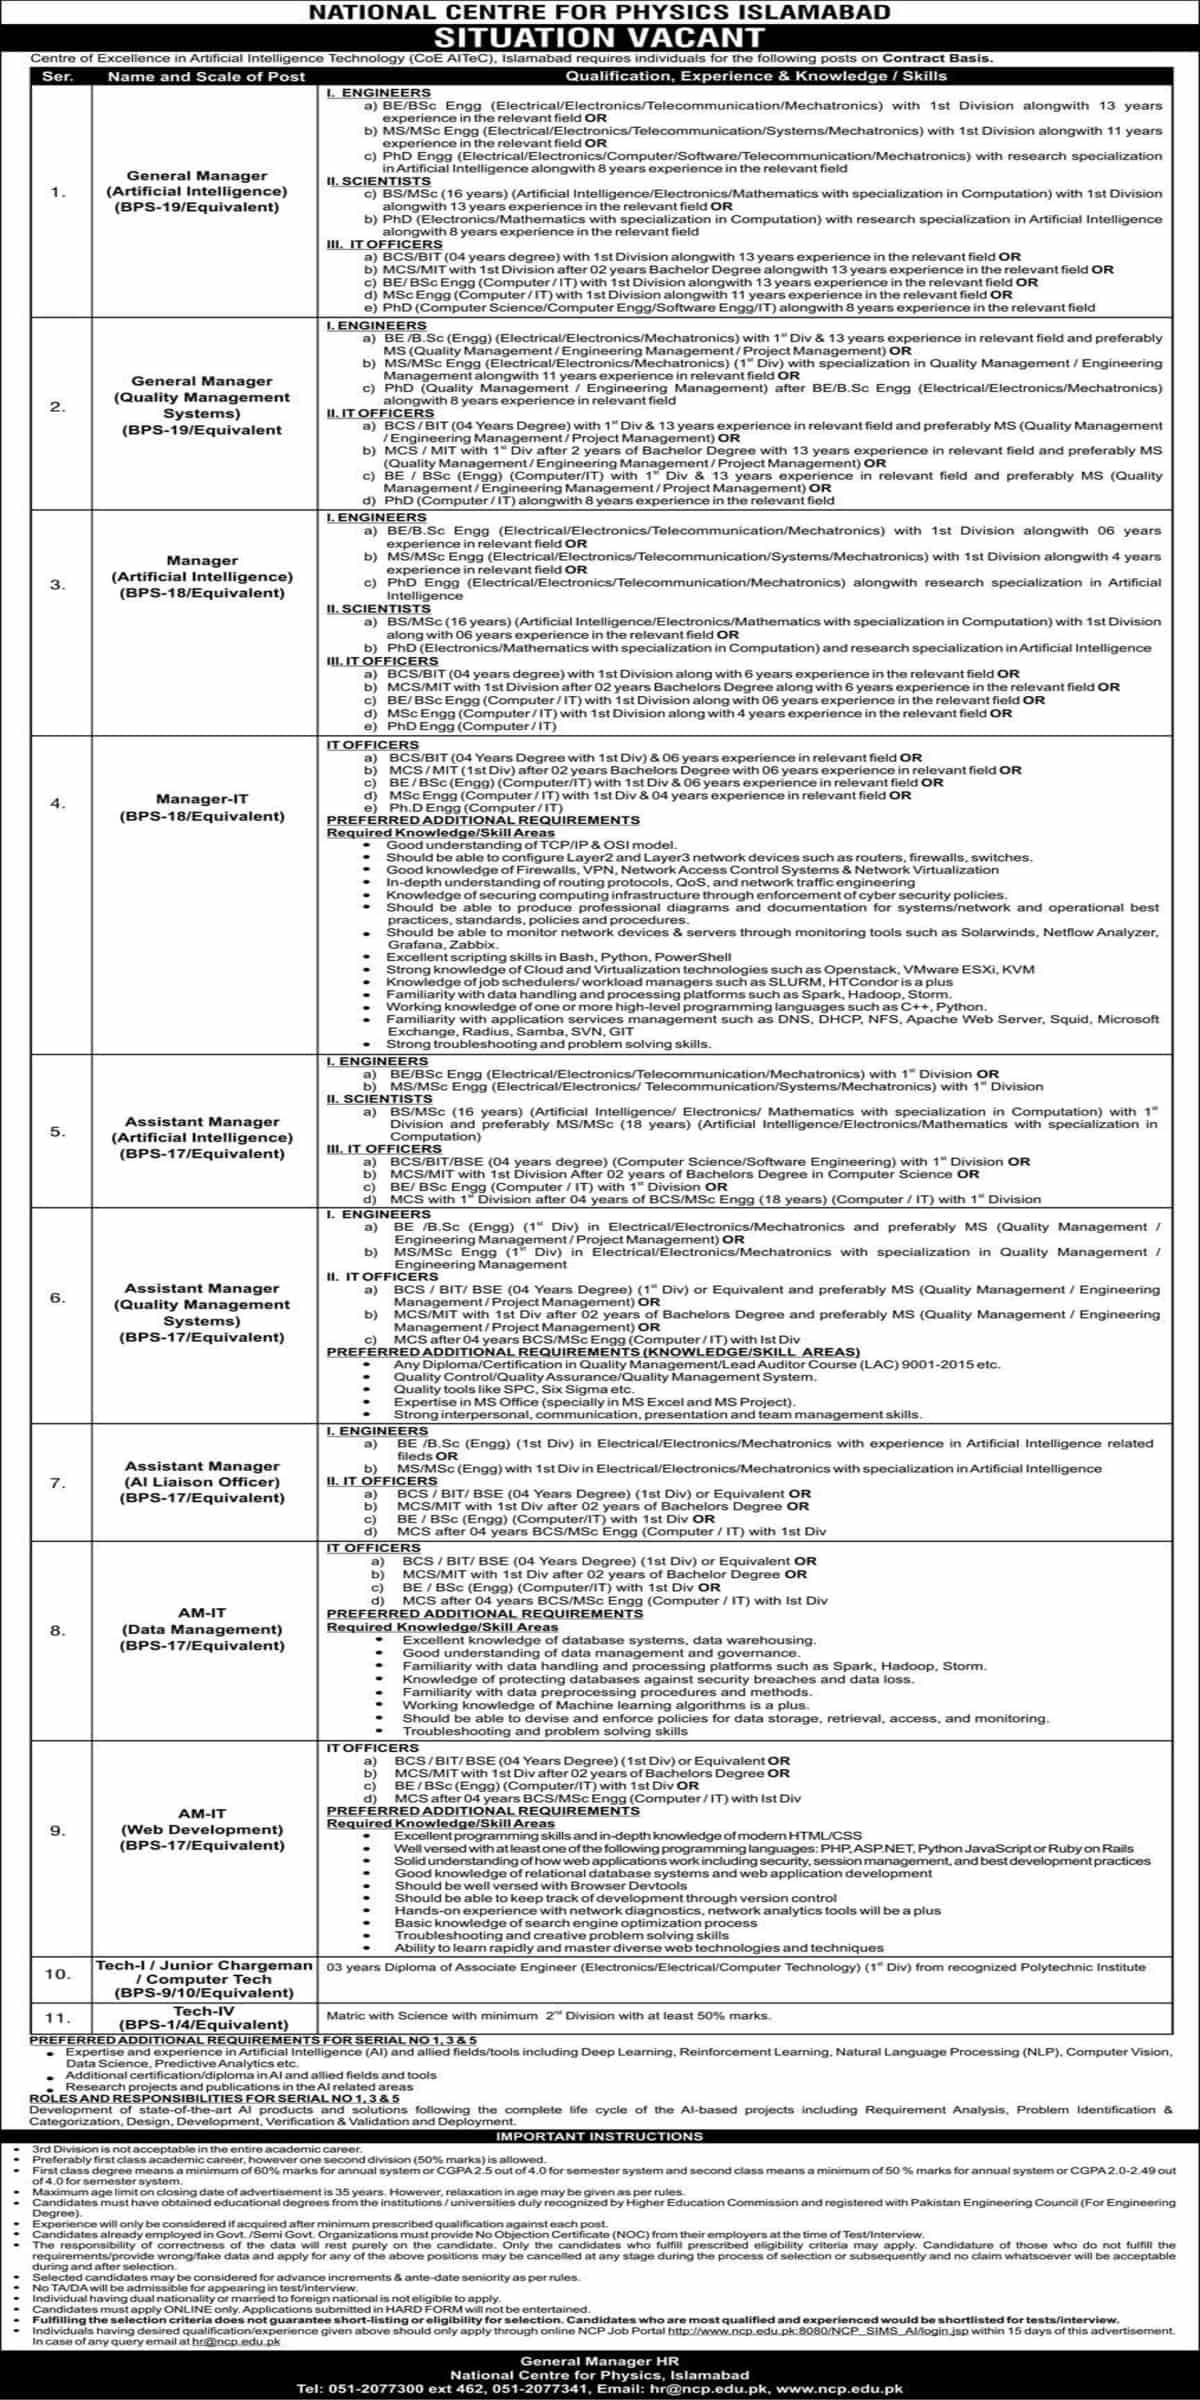 National Centre for Physics NCP Islamabad Jobs 2022 www.ncp.edu.pk